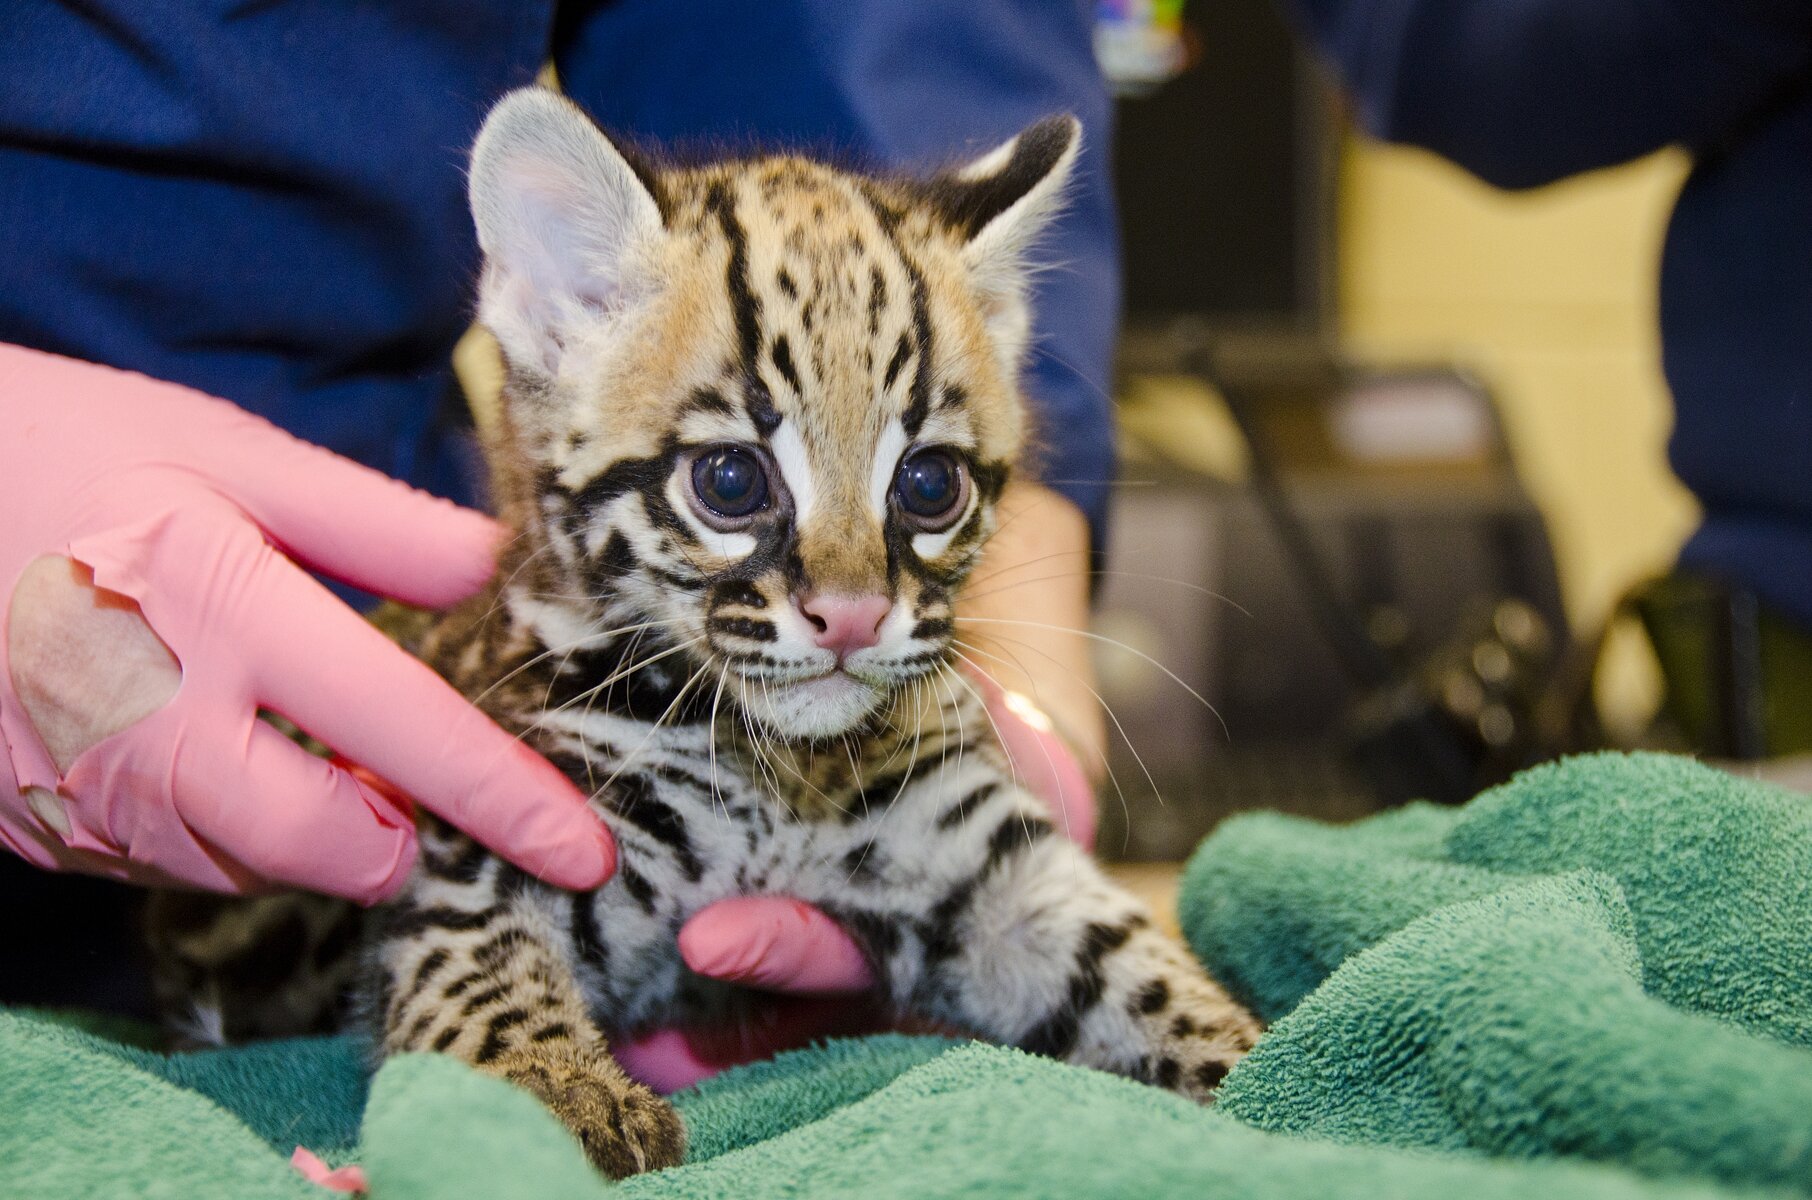 8-week-old Evita, a female ocelot born at Woodland Park Zoo, gets a check-up and clean bill of health. The kitten is expected to be on public view in mid- to late-April Photo credit: Ryan Hawk/Woodland Park Zoo